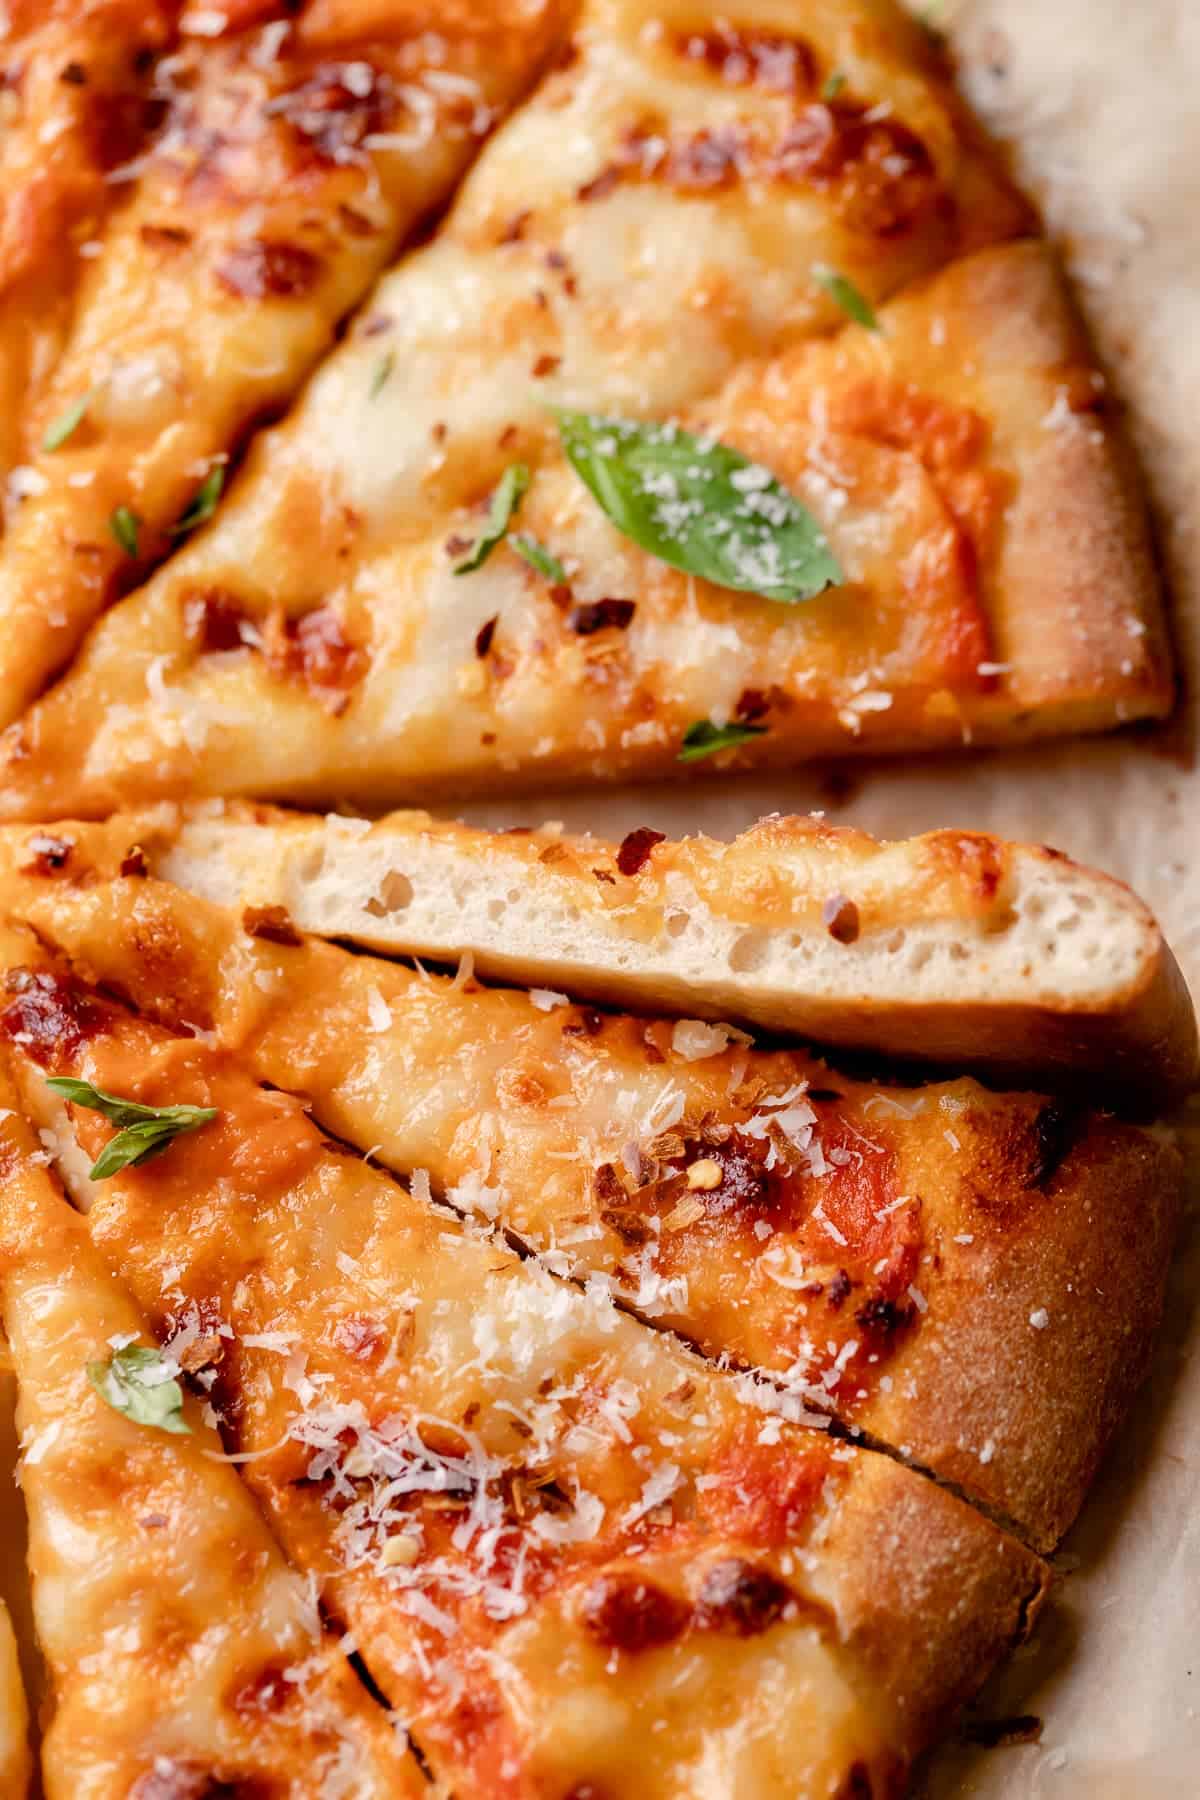 a slice of vodka sauce pizza on its side to show the bubbly dough texture and rich vodka sauce color.